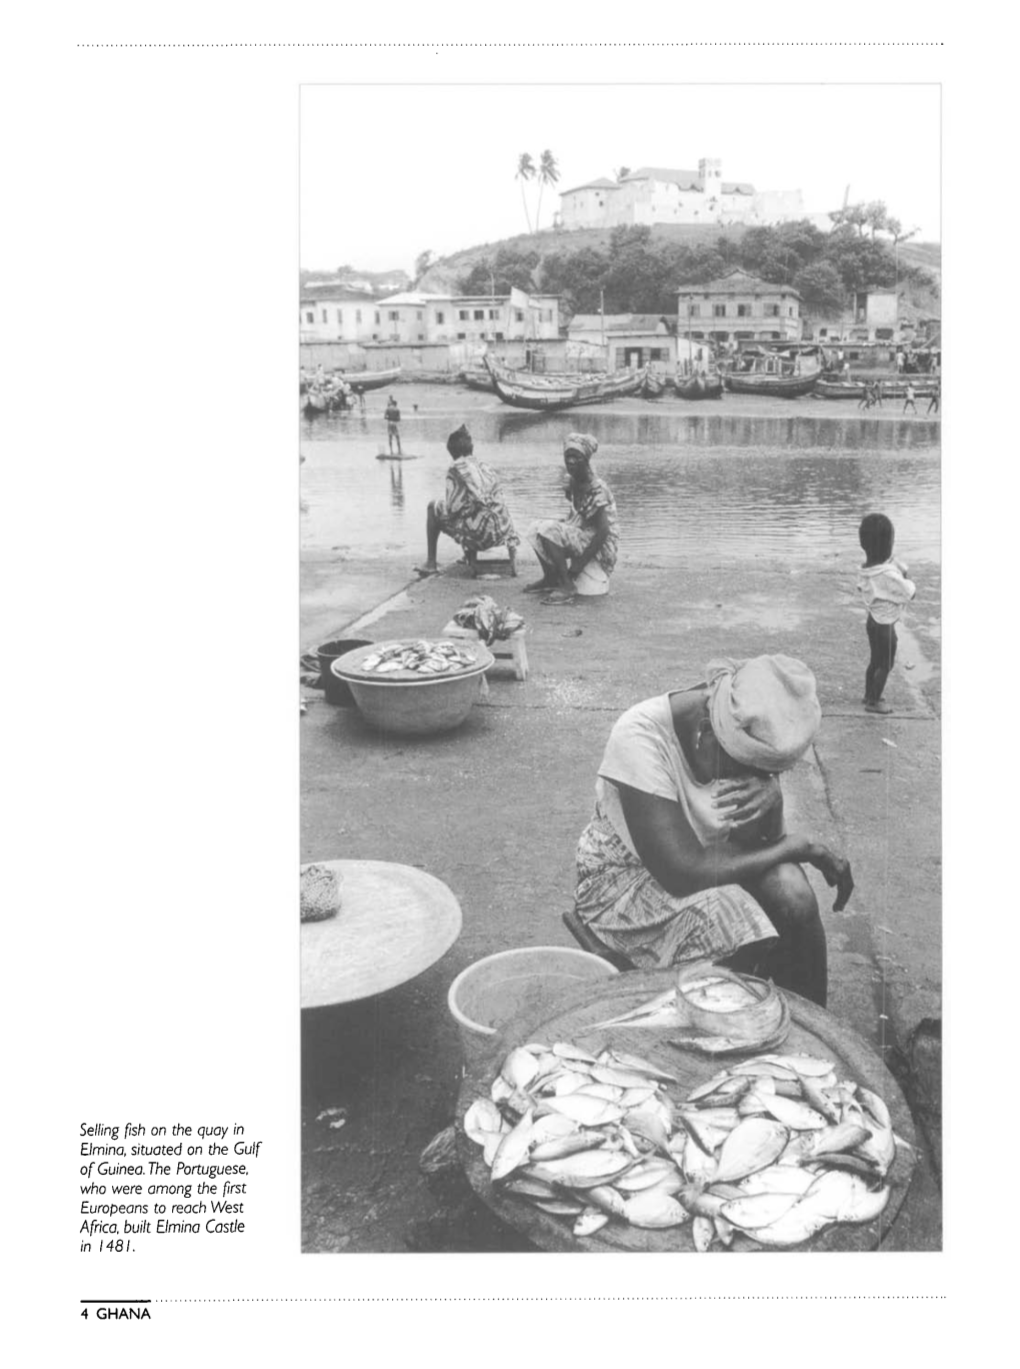 Selling Fish on the Quay in Elmina, Situated on the Gulf Ofguinea.The Portuguese, Who Were Among the First Europeans to Reach West Africa, Built Elmina Castle in 1481